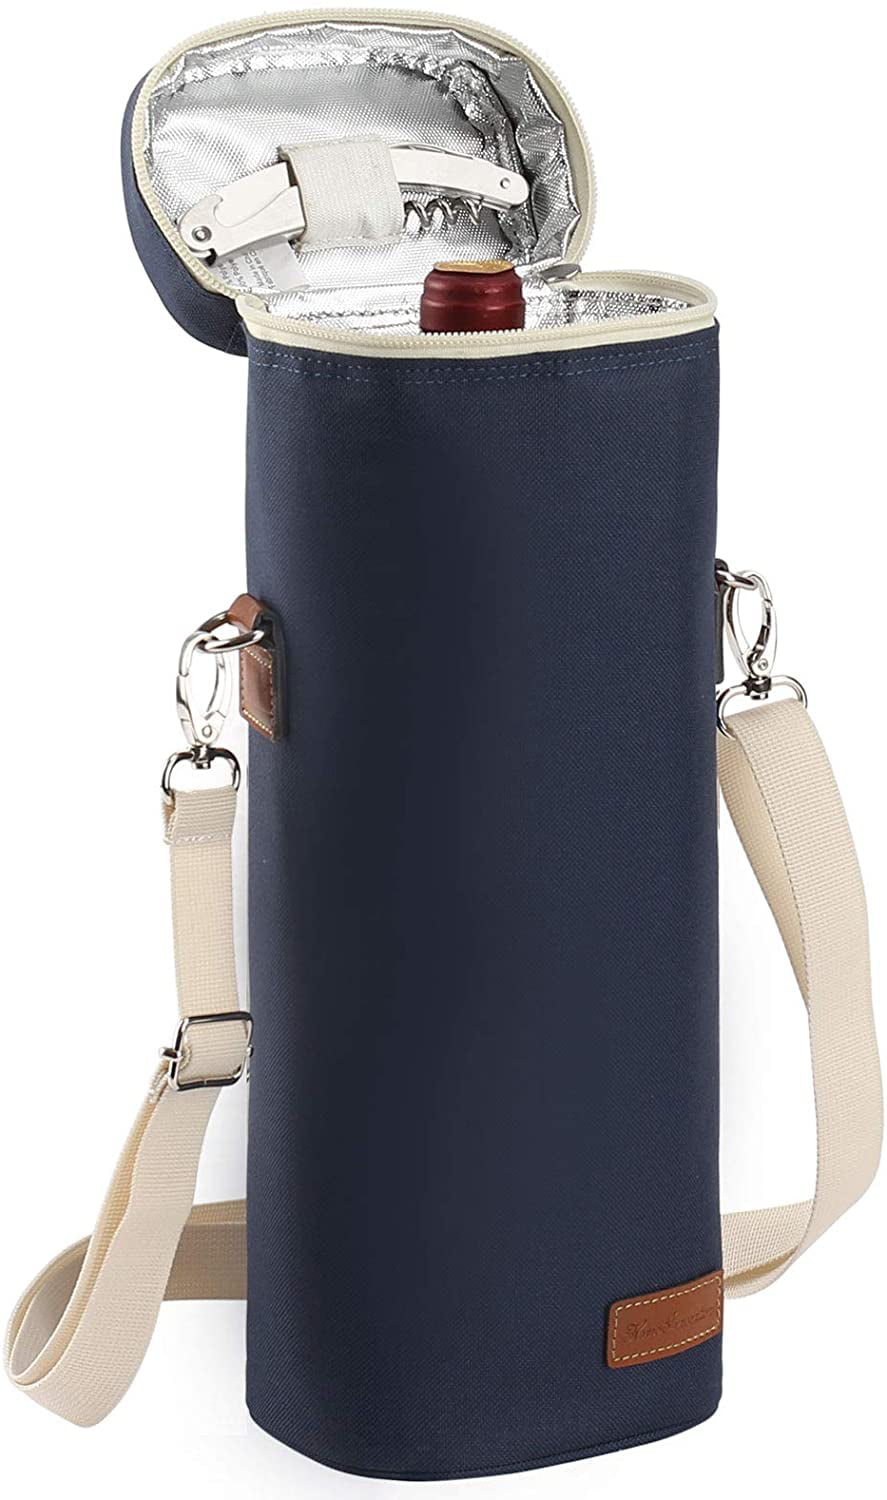 Travel Padded Wine Cooler with Corkscrew Opener and Adjustable Shoulder Strap Perfect Wine Lovers or Wedding Gift-Navy Blue Personalized Wine Carrier Bag 1 Bottle Insulated Wine Tote